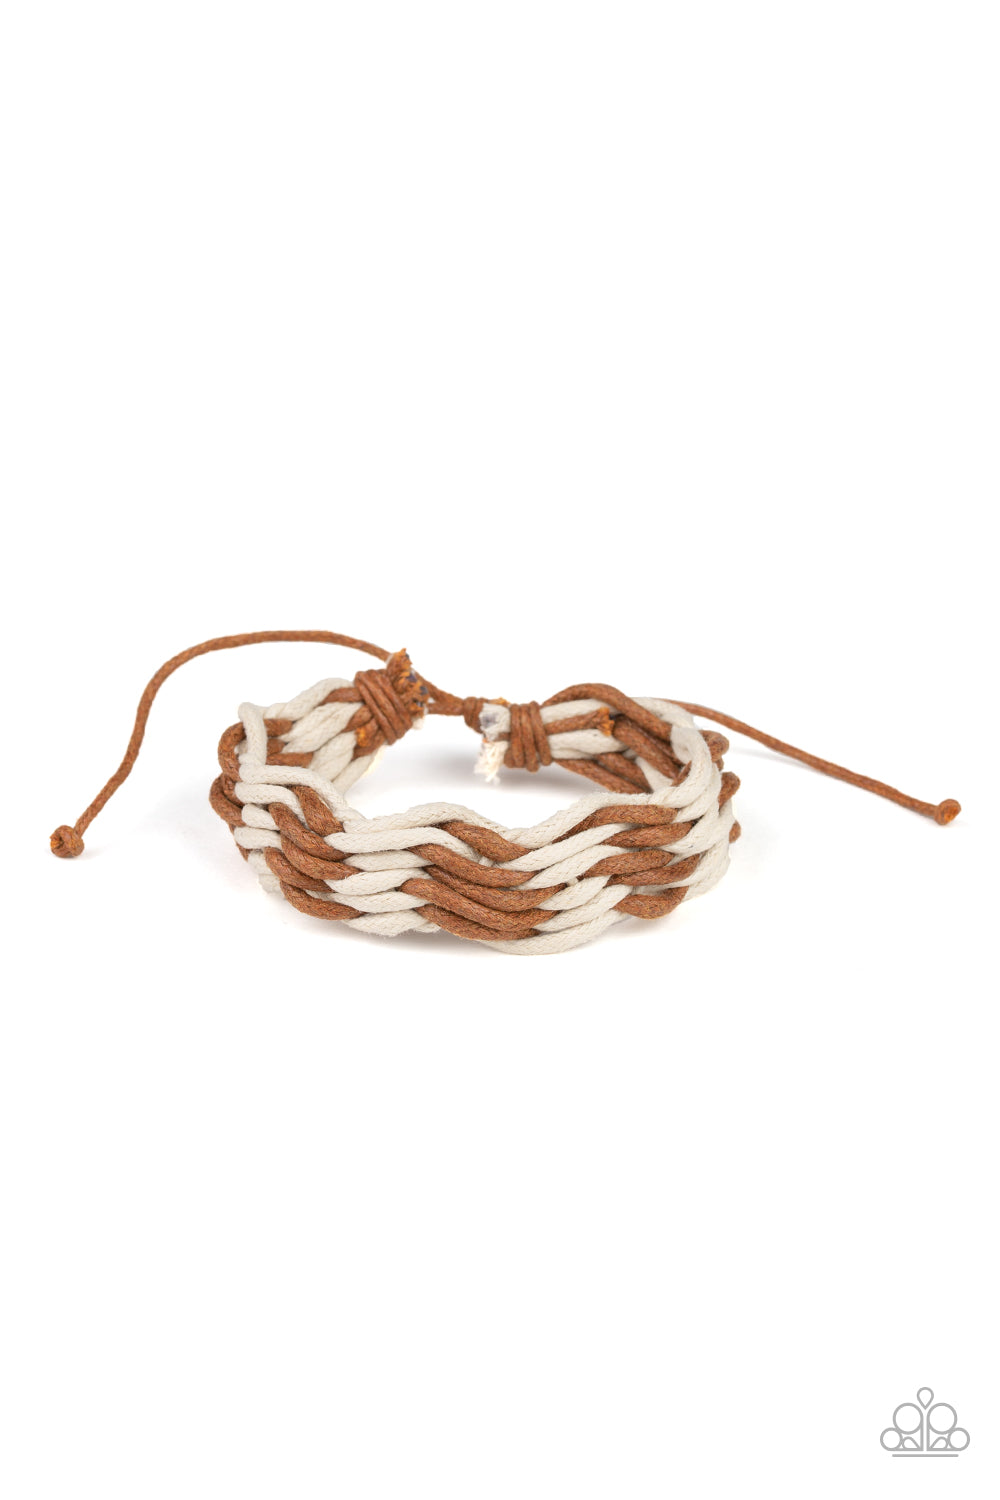 WEAVE High and Dry Brown Urban Bracelet